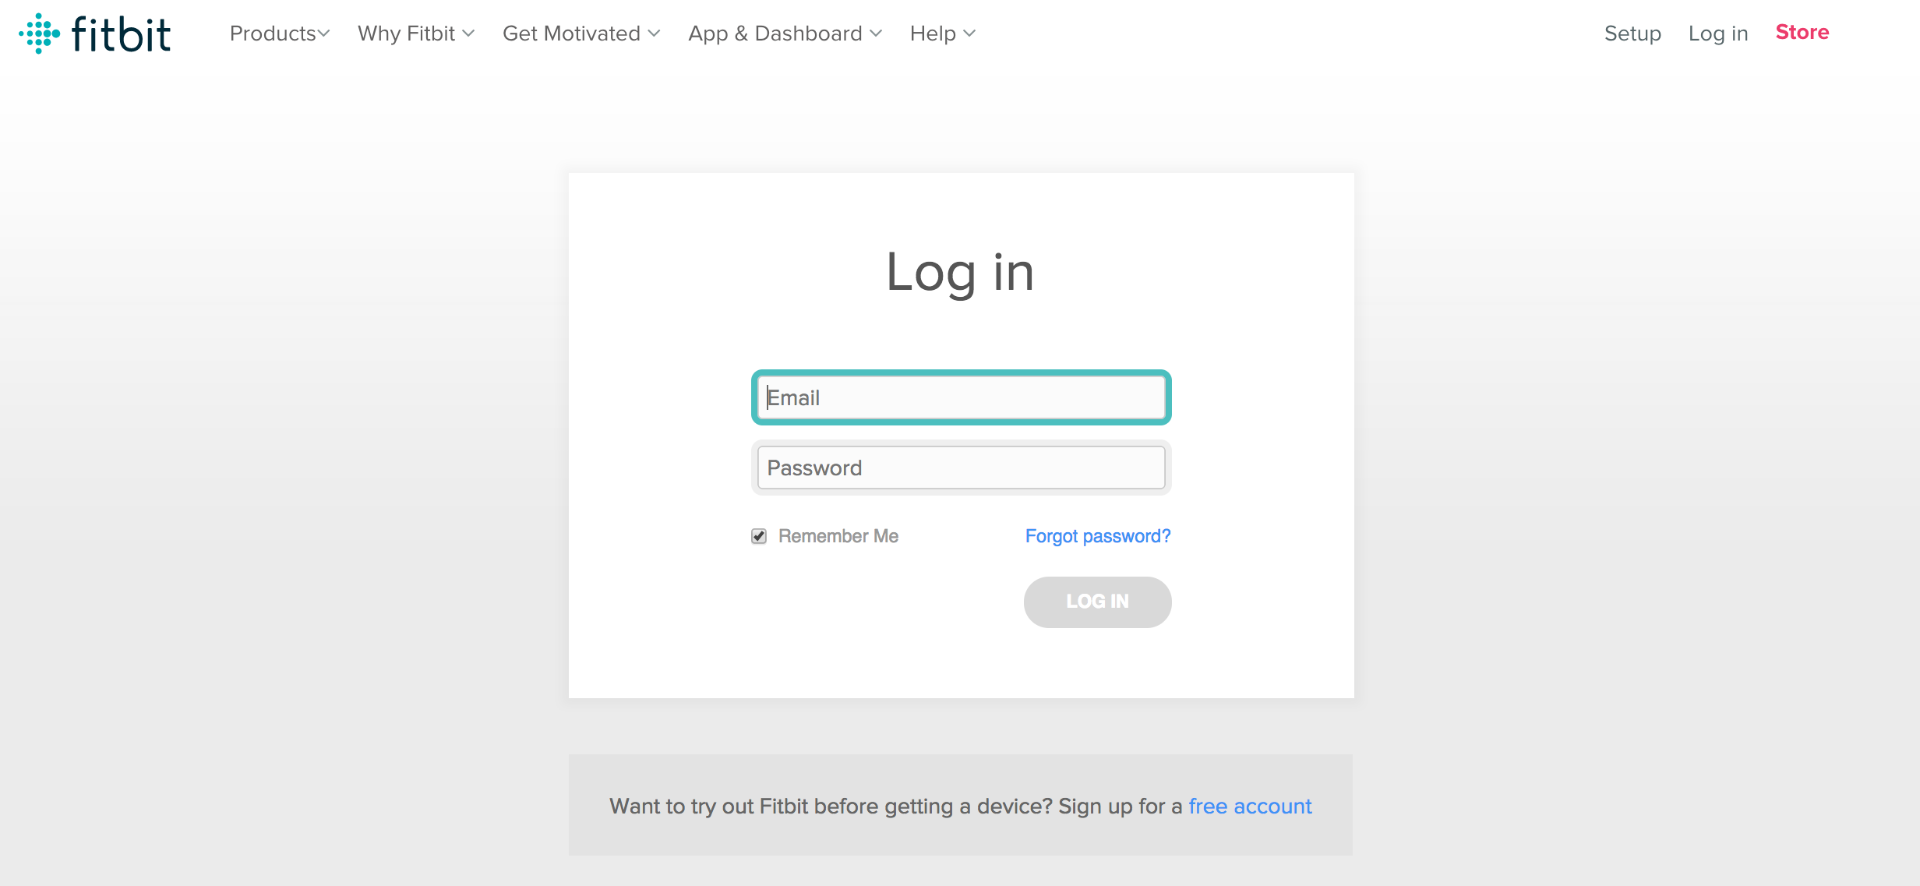 ManualConnectFitbitLogin.png